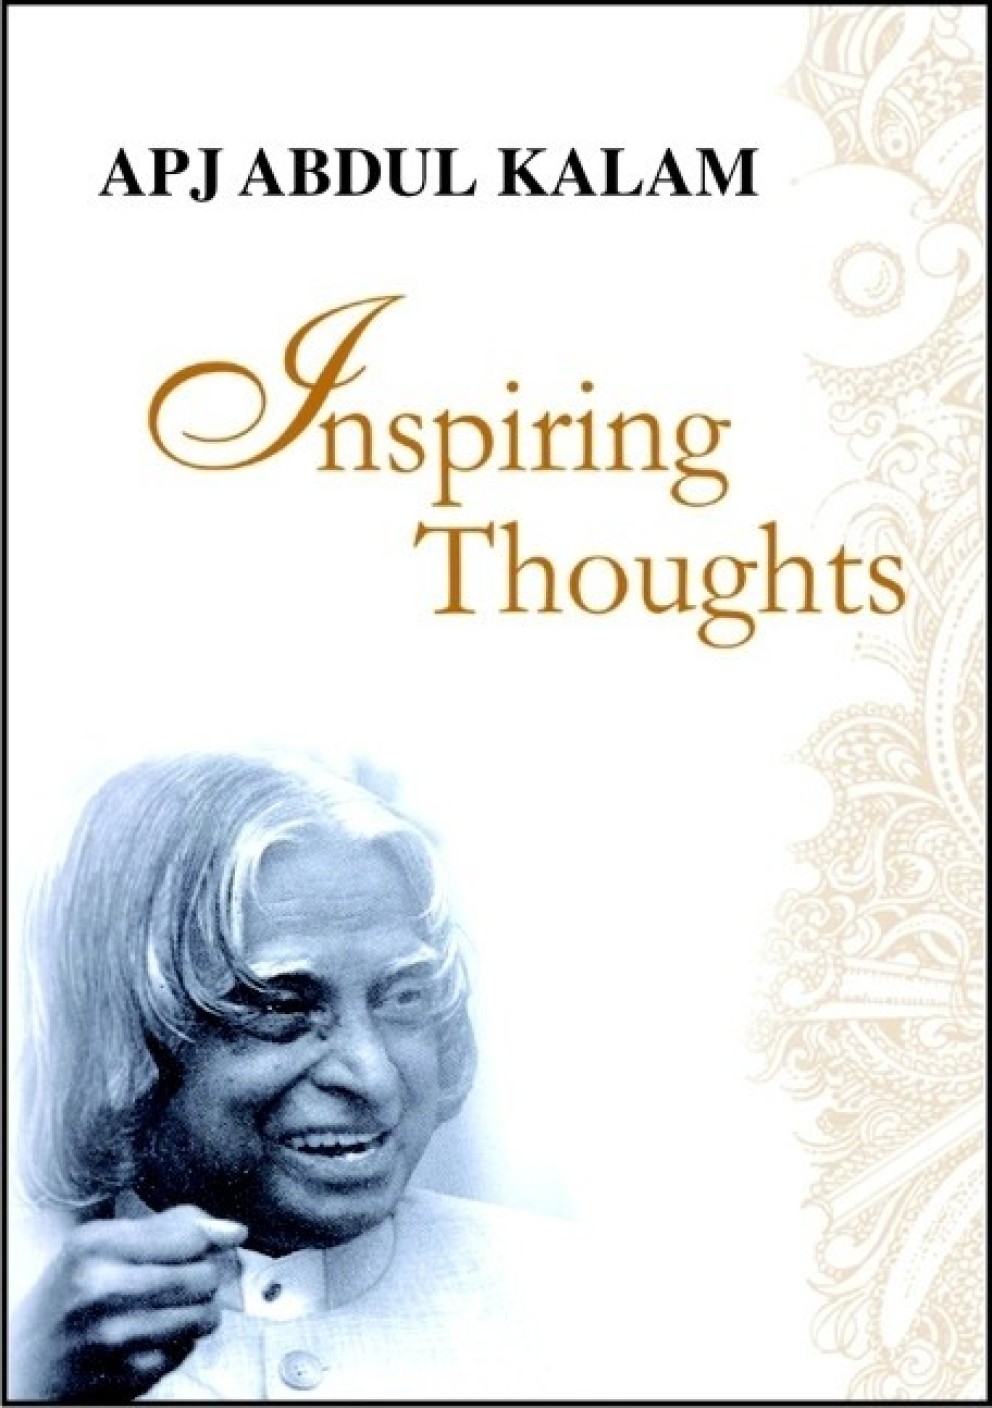 Image Result For Inspiring Thoughts By Apj Abdul Kalam Book